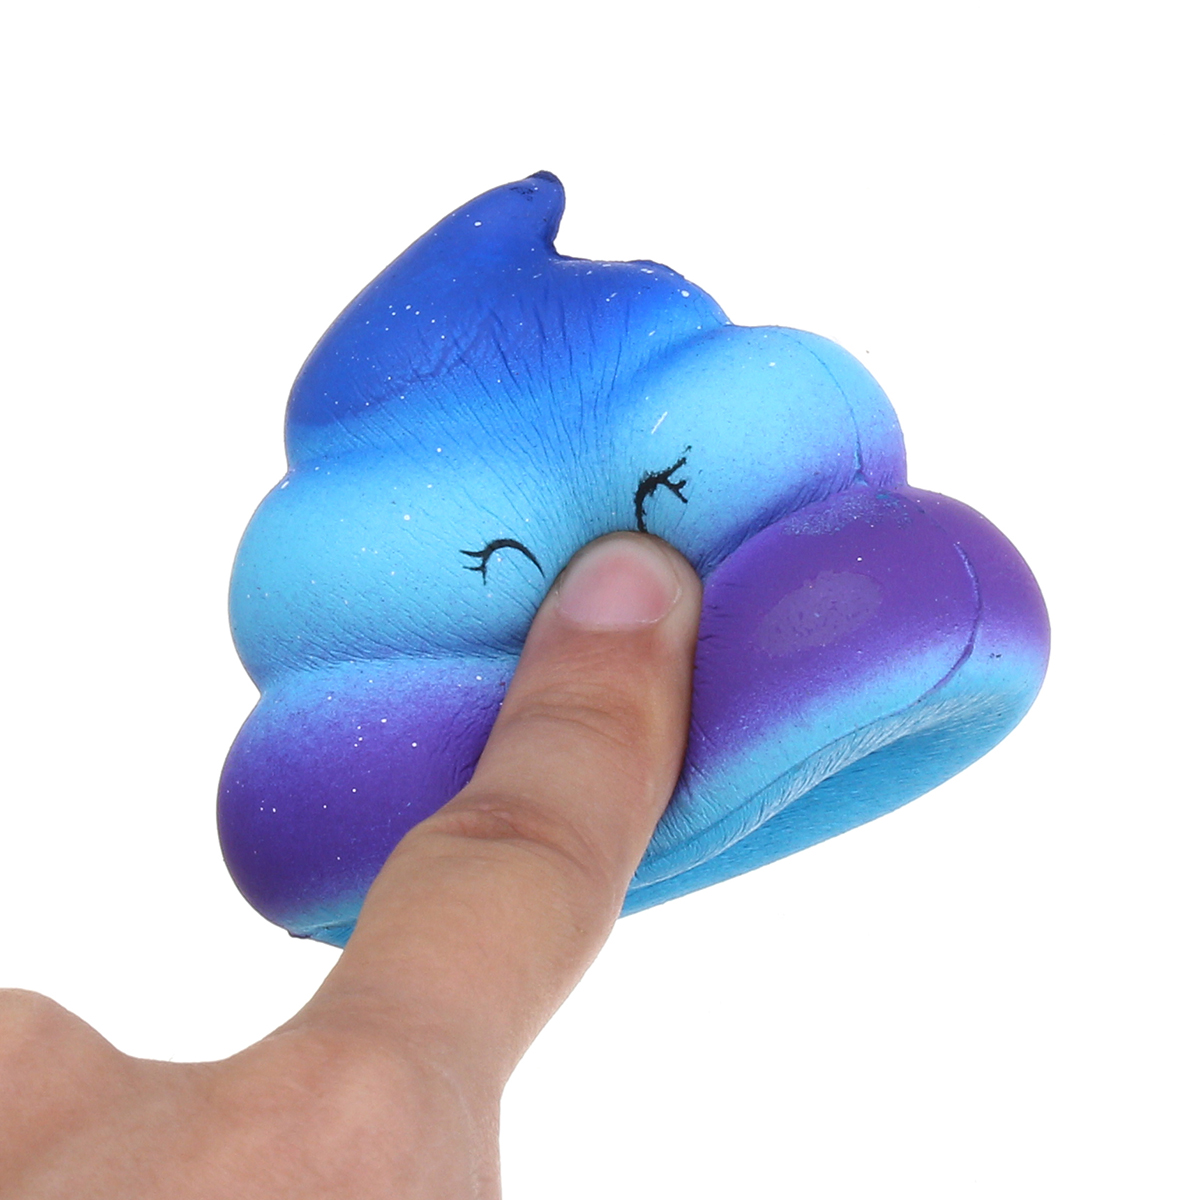 Squishy-Galaxy-Poo-Squishy-Hand-Pillow-65CM-Slow-Rising-With-Packaging-Collection-Gift-Decor-Toy-1311228-7